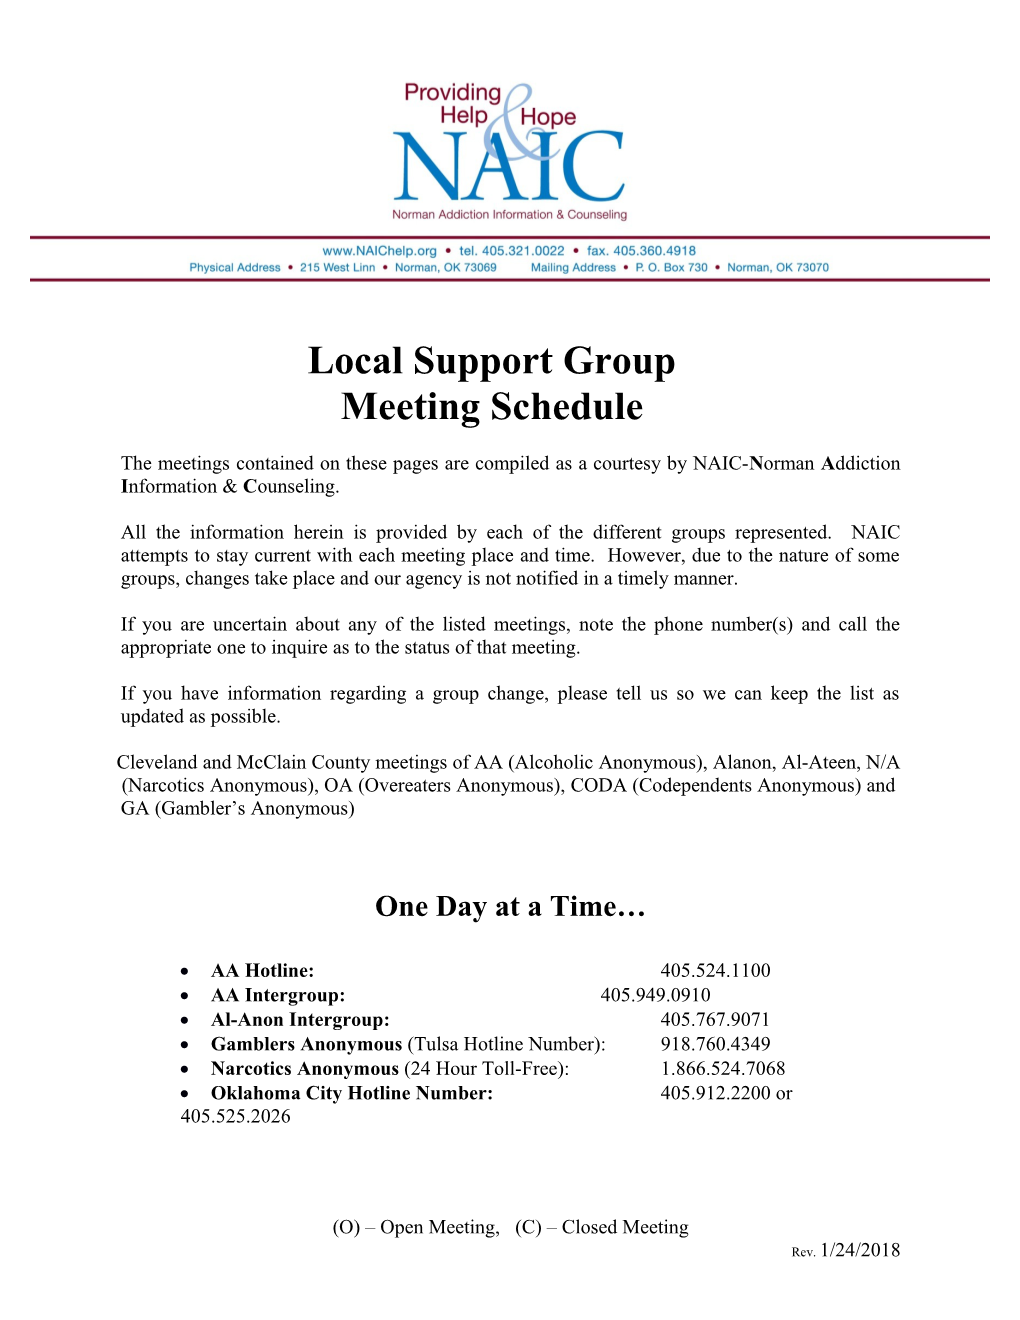 Local Support Group Meeting Schedule the Meetings Contained on These Pages Are Compiled